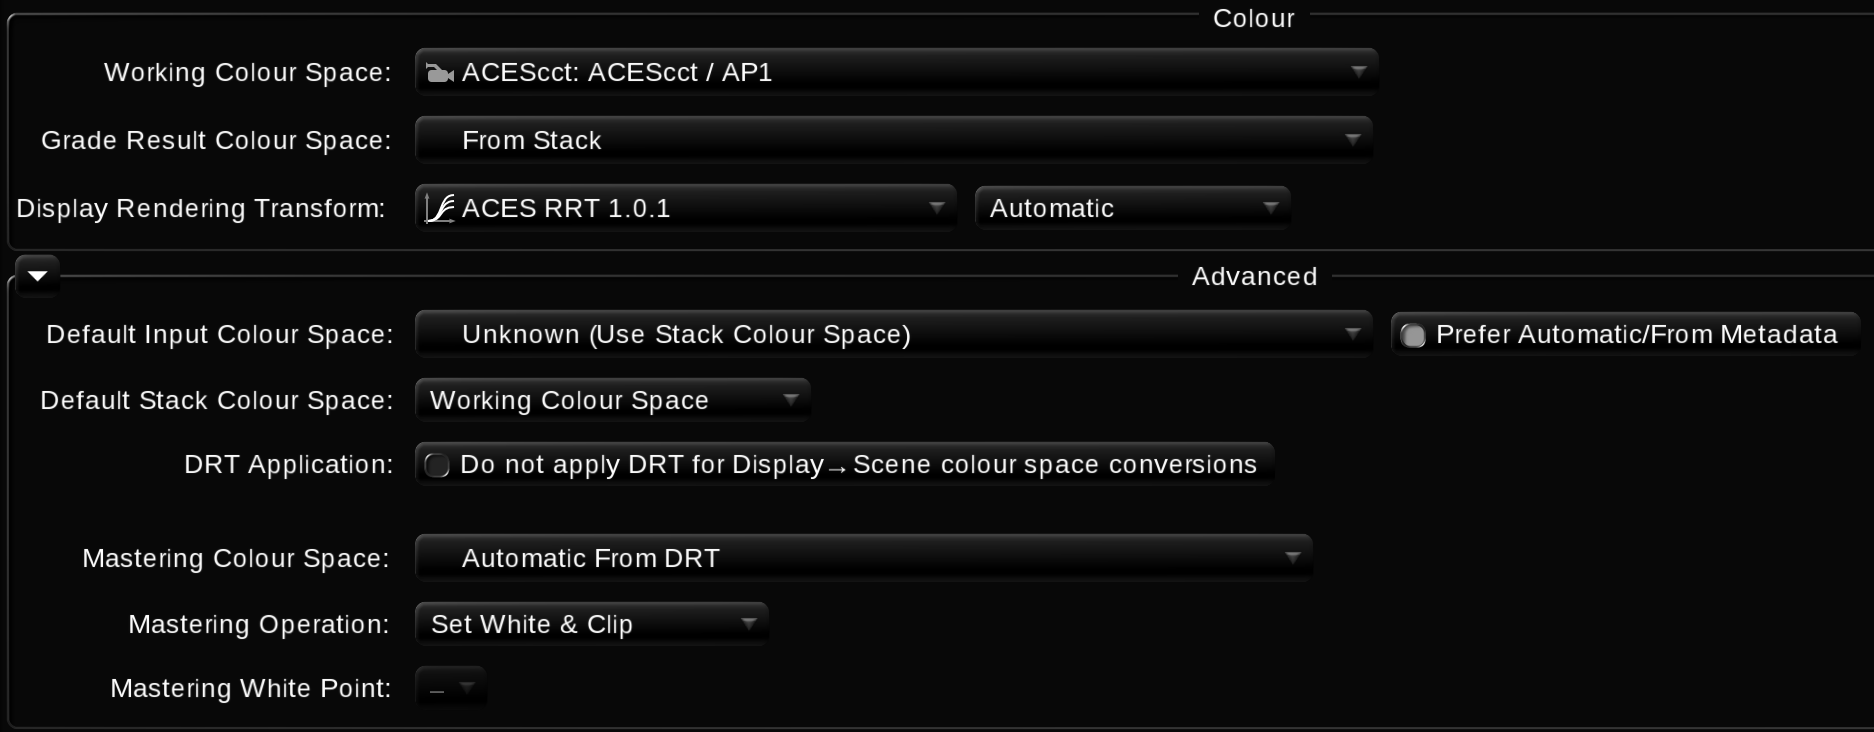 Color Managed Workflow in Baselight_Image02.png